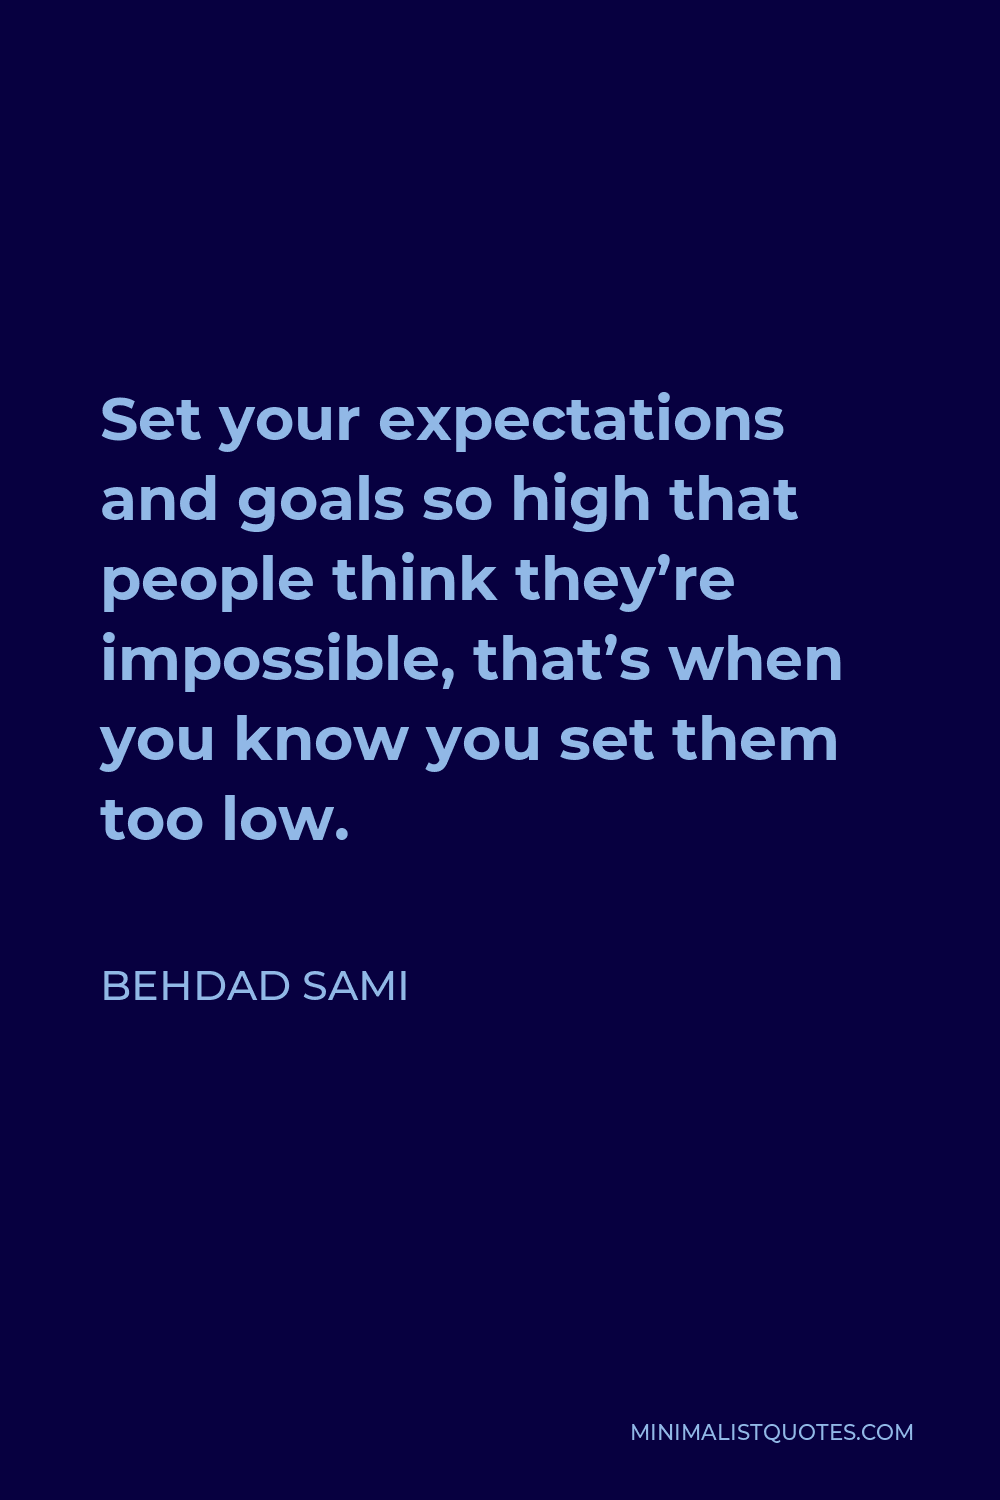 Behdad Sami Quote - Set your expectations and goals so high that people think they’re impossible, that’s when you know you set them too low.